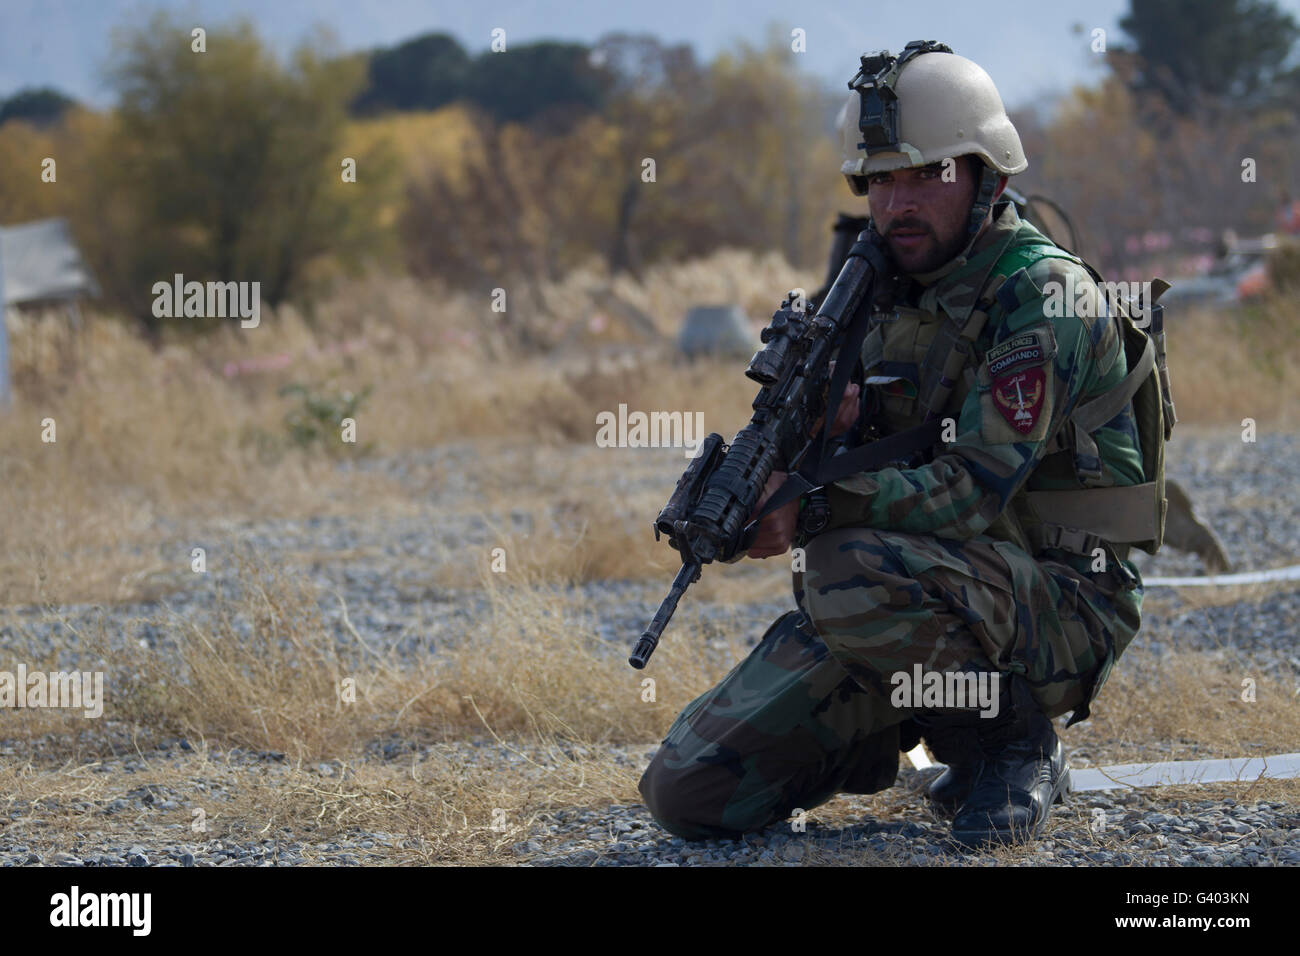 n Afghan National Army Special Forces Mitglied. Stockfoto